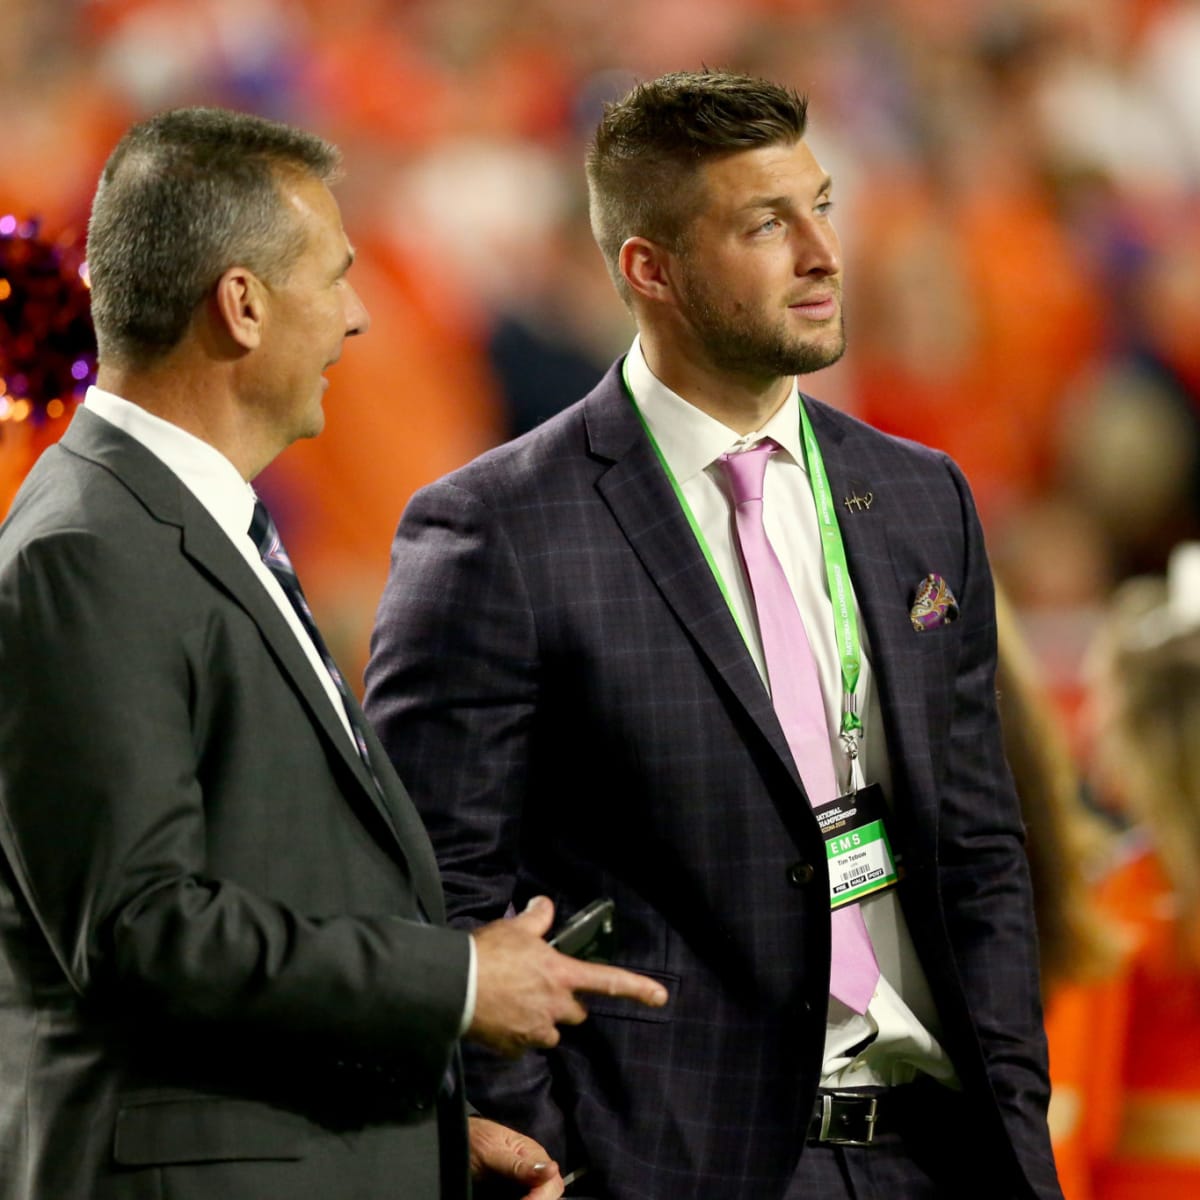 Tim Tebow Says It Was 'Blessing' to Play for Jaguars